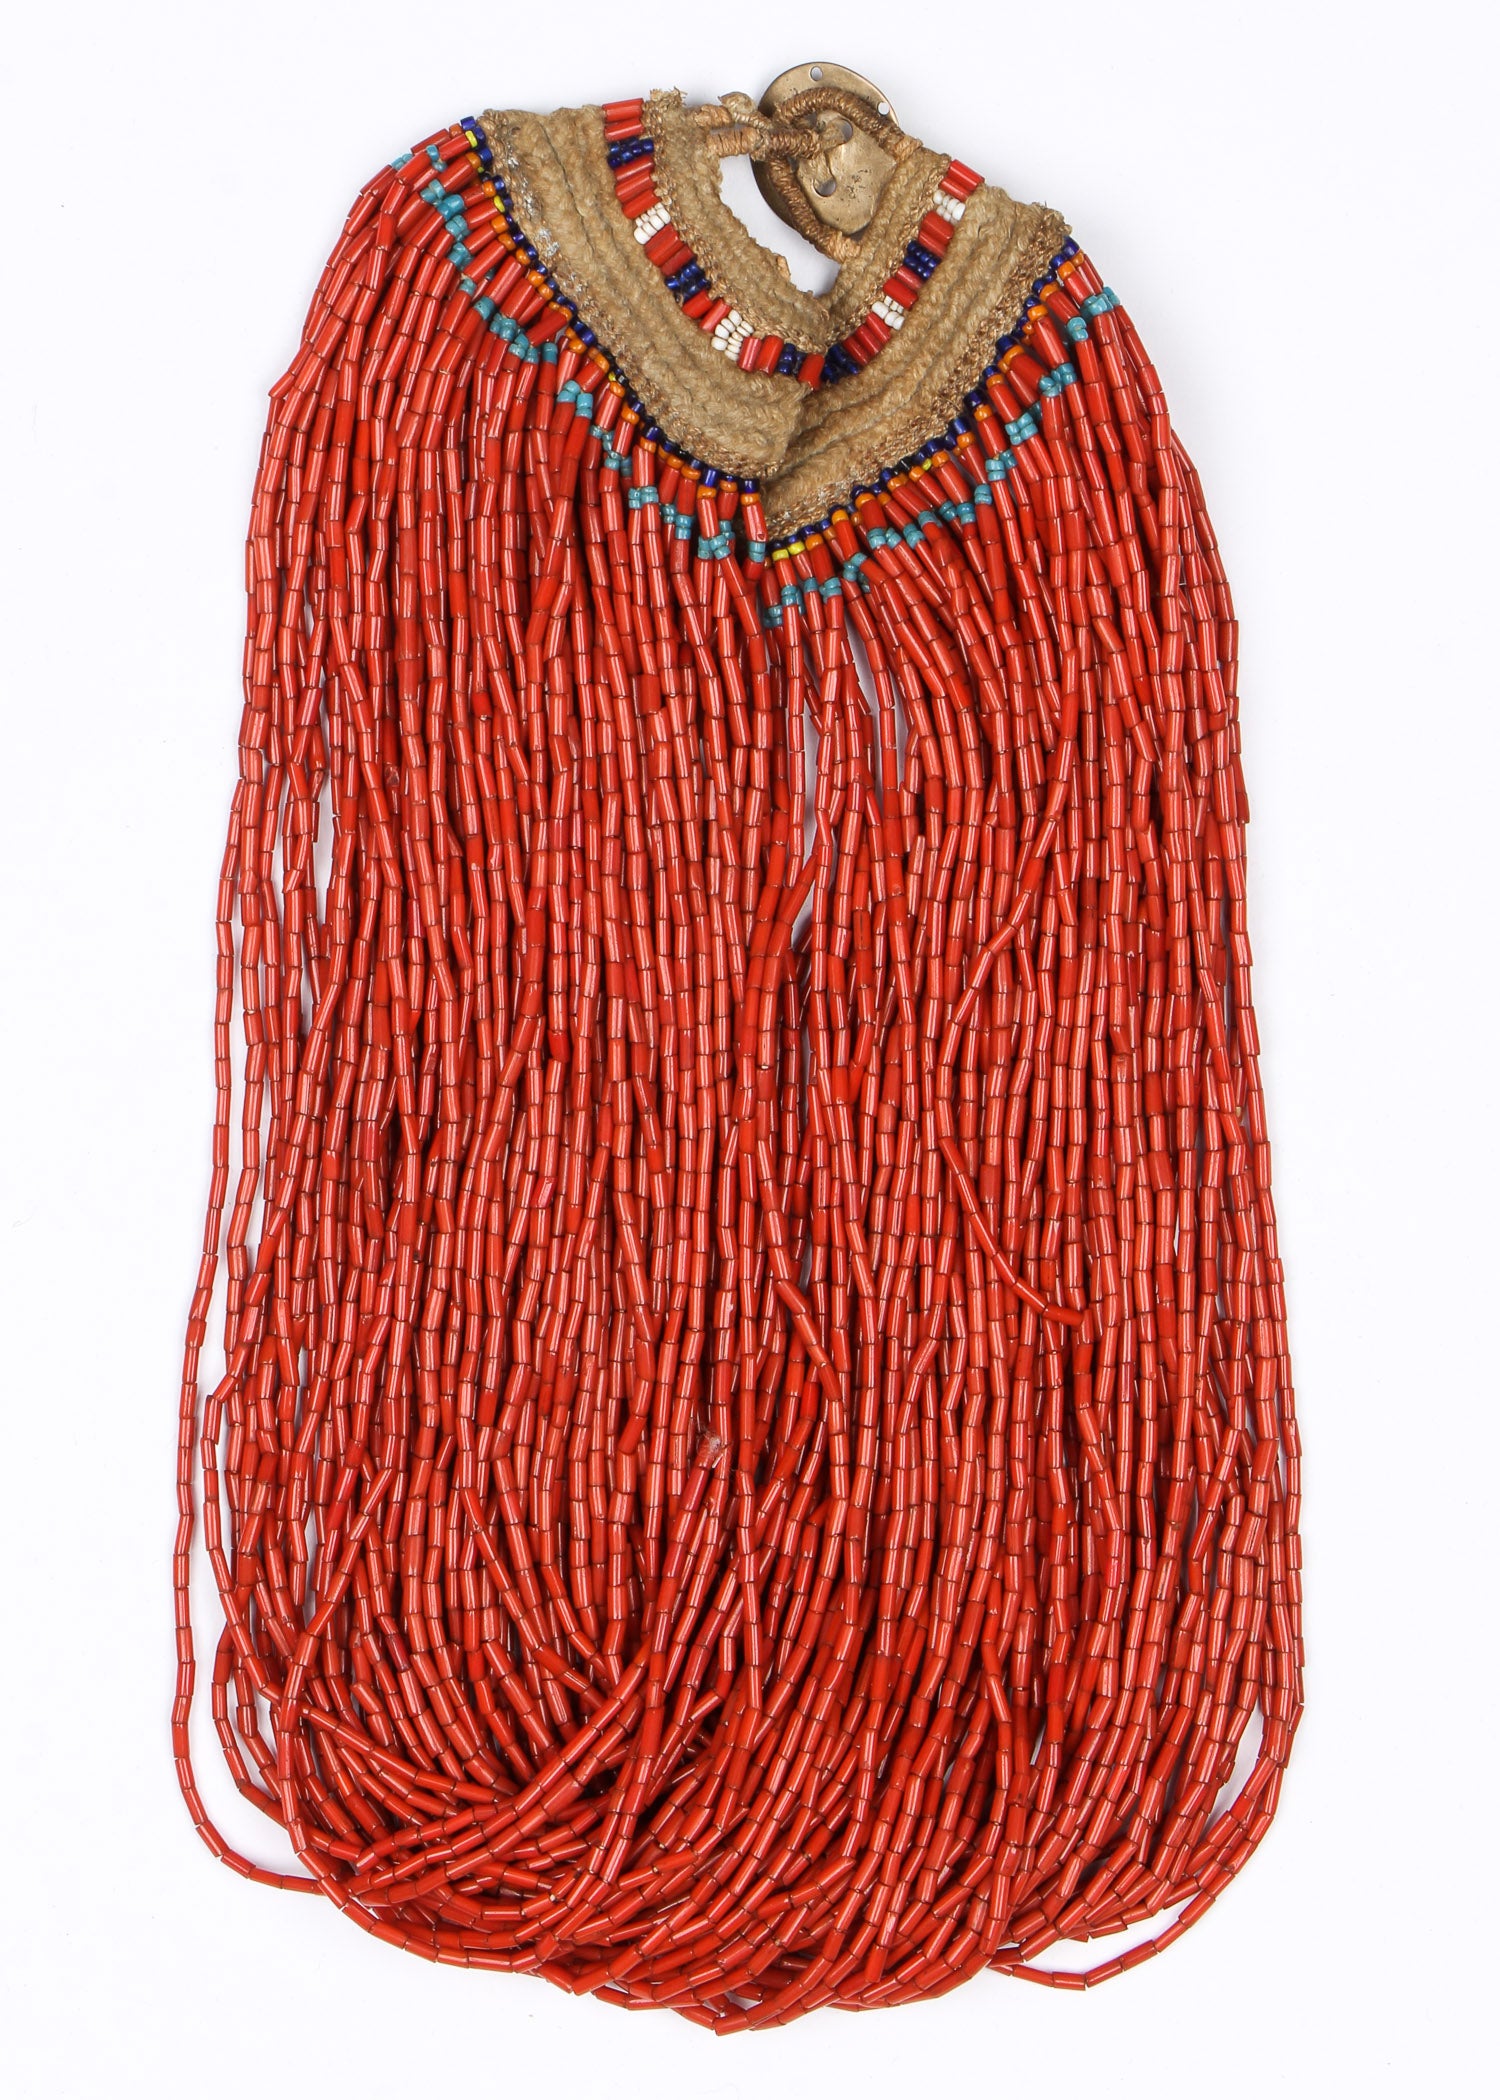 Authentic Konyak Red Bead Necklace, Early 1900"s, # 1481